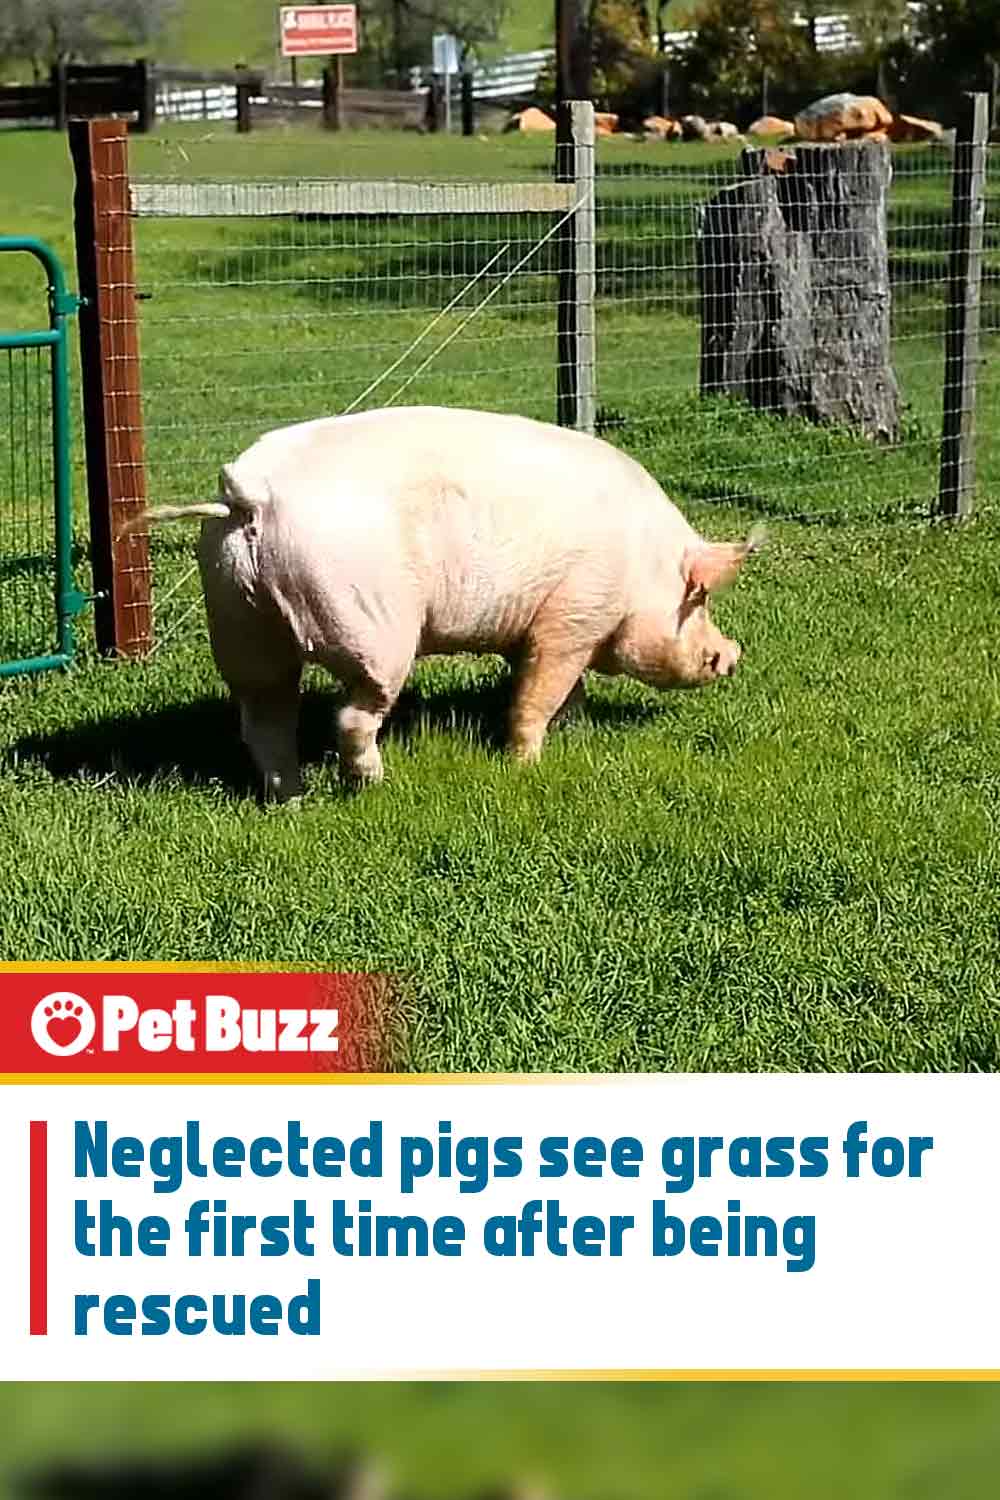 Neglected pigs see grass for the first time after being rescued